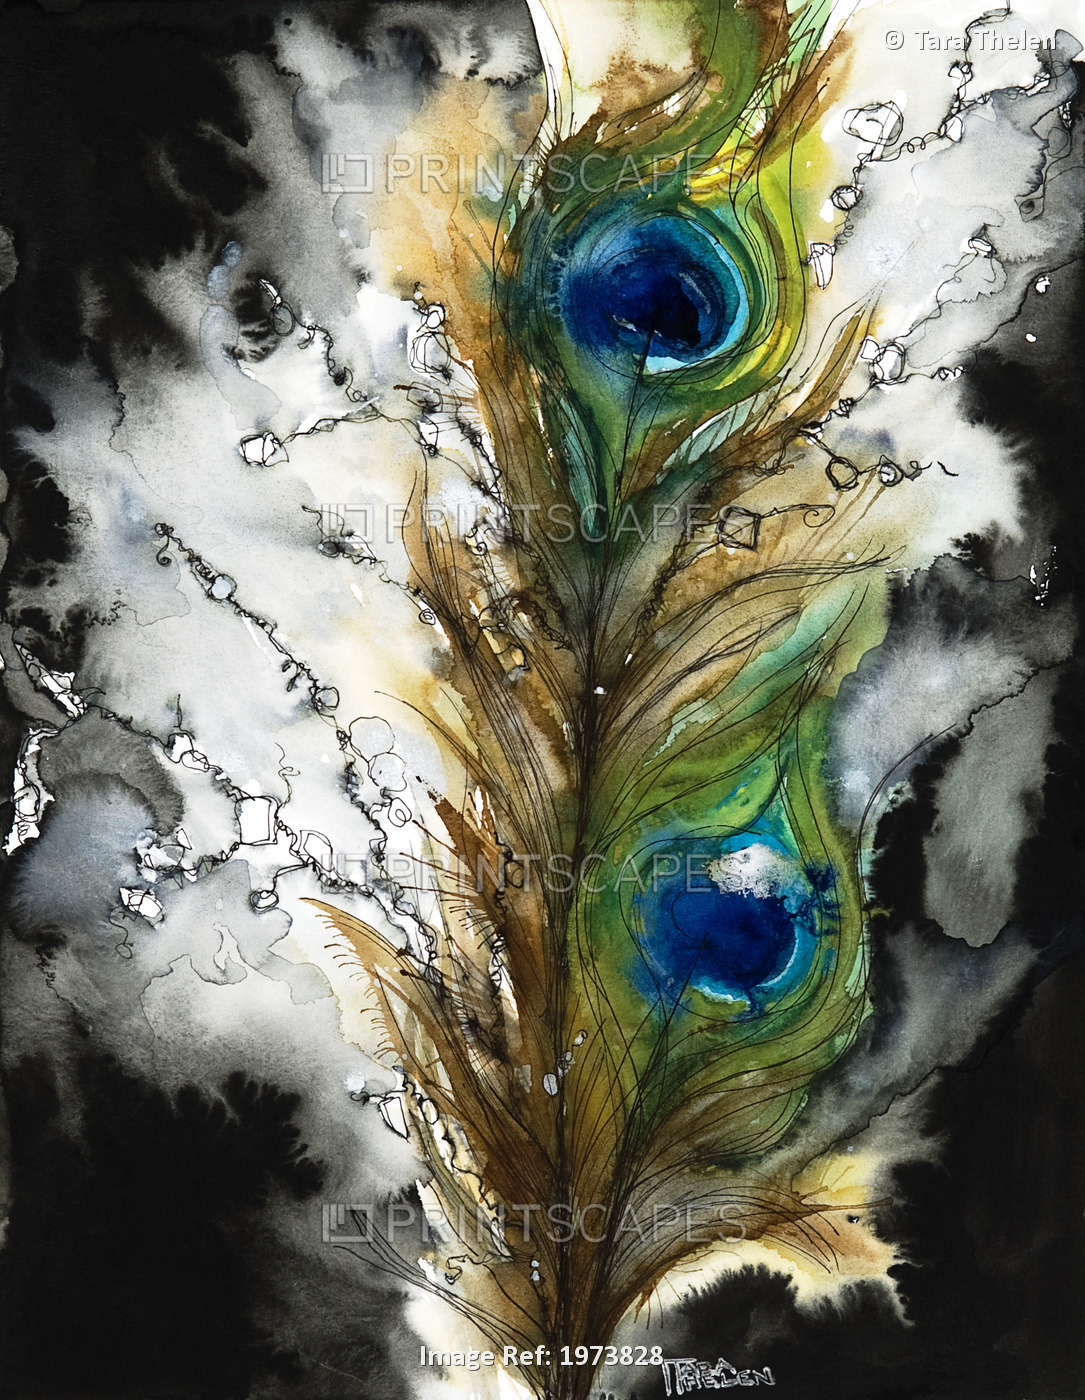 Female, Abstract Of Peacock Feathers (Watercolor Painting).